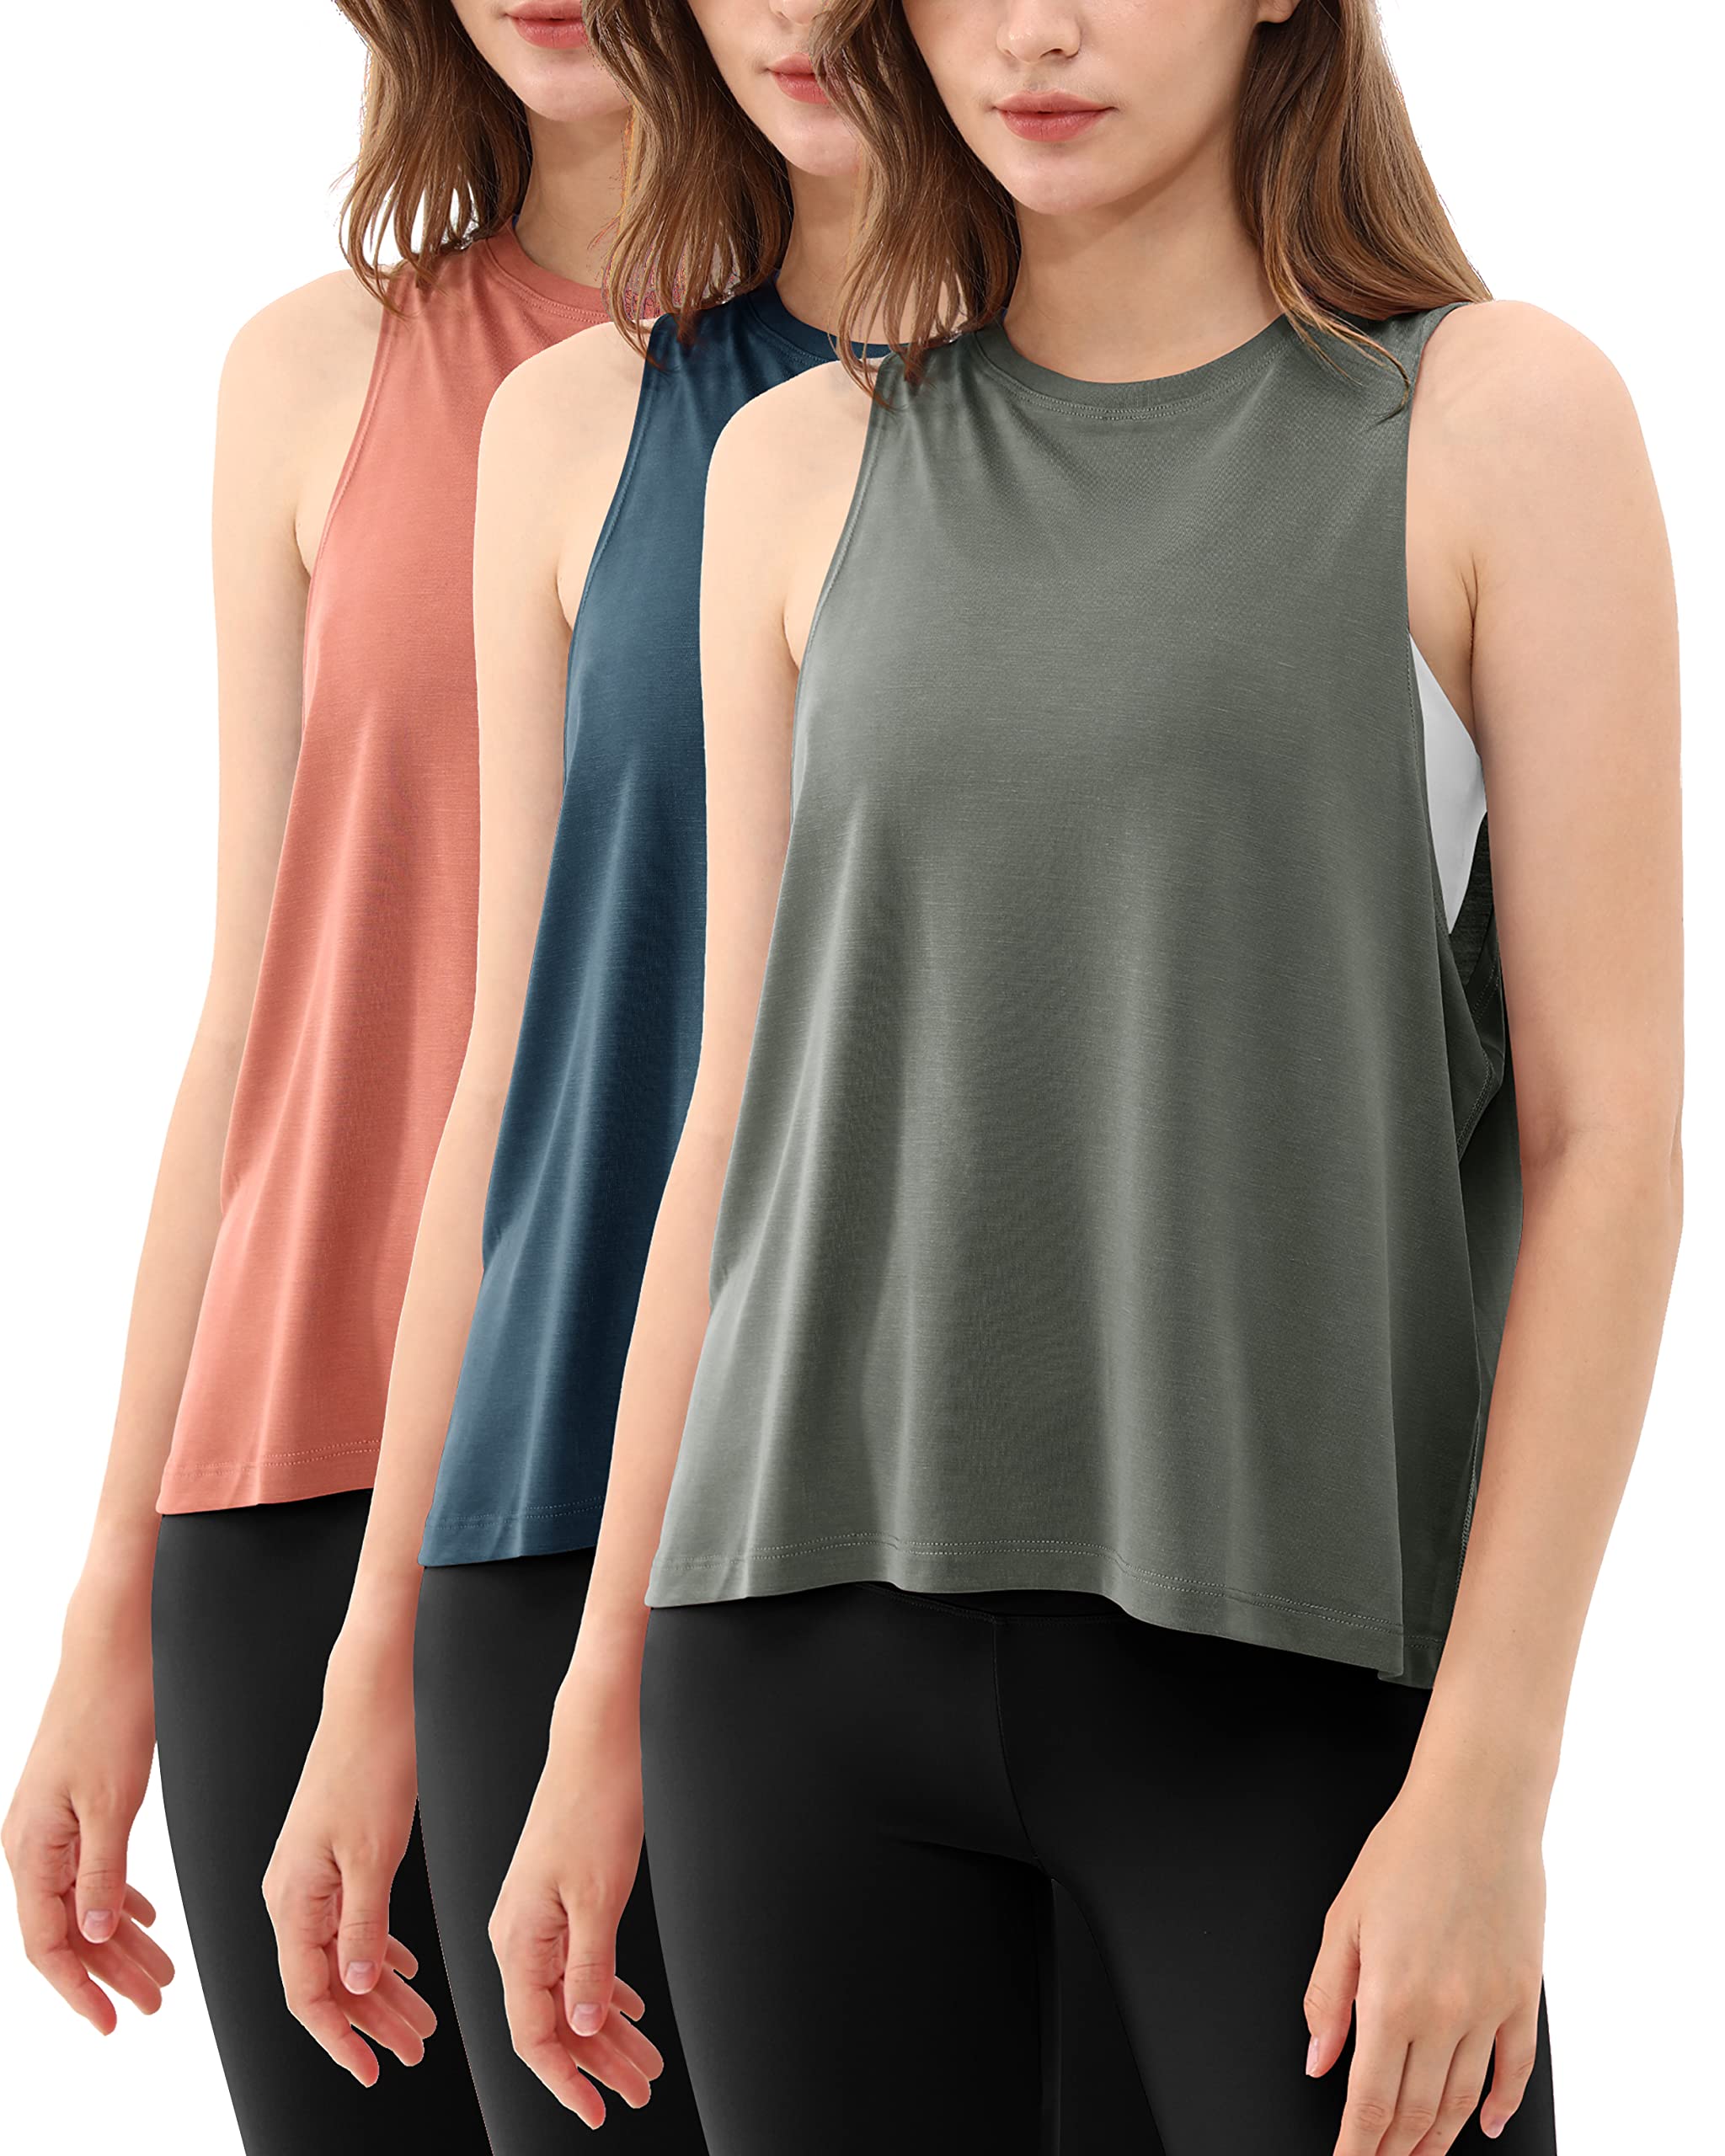 ODODOS 3-Pack Loose Tank Tops for Women Sleeveless Gym Athletic